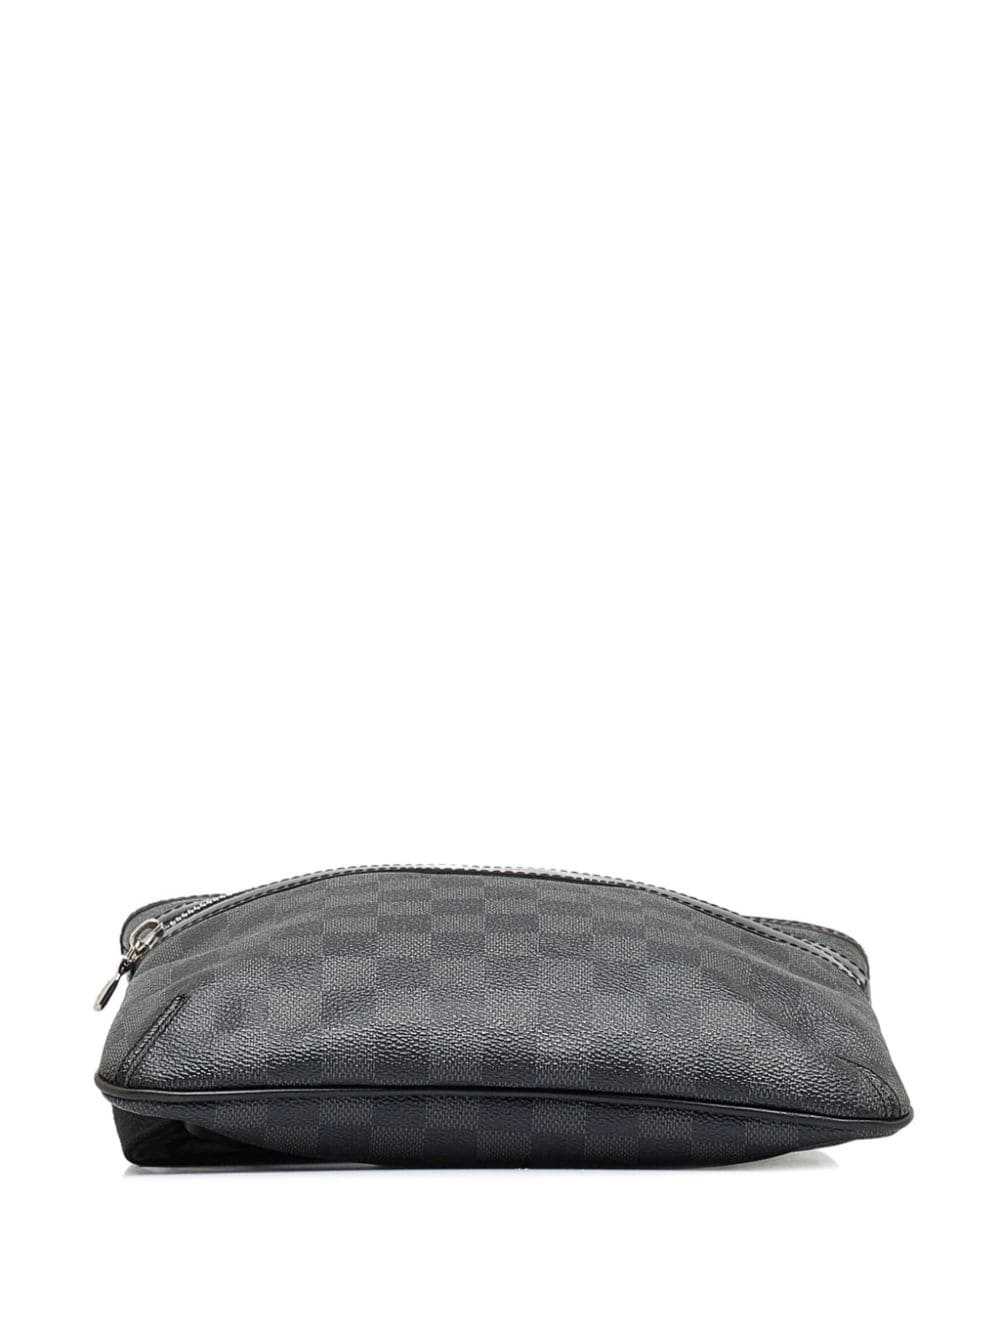 Louis Vuitton Pre-Owned 2010 pre-owned Damier Gra… - image 4